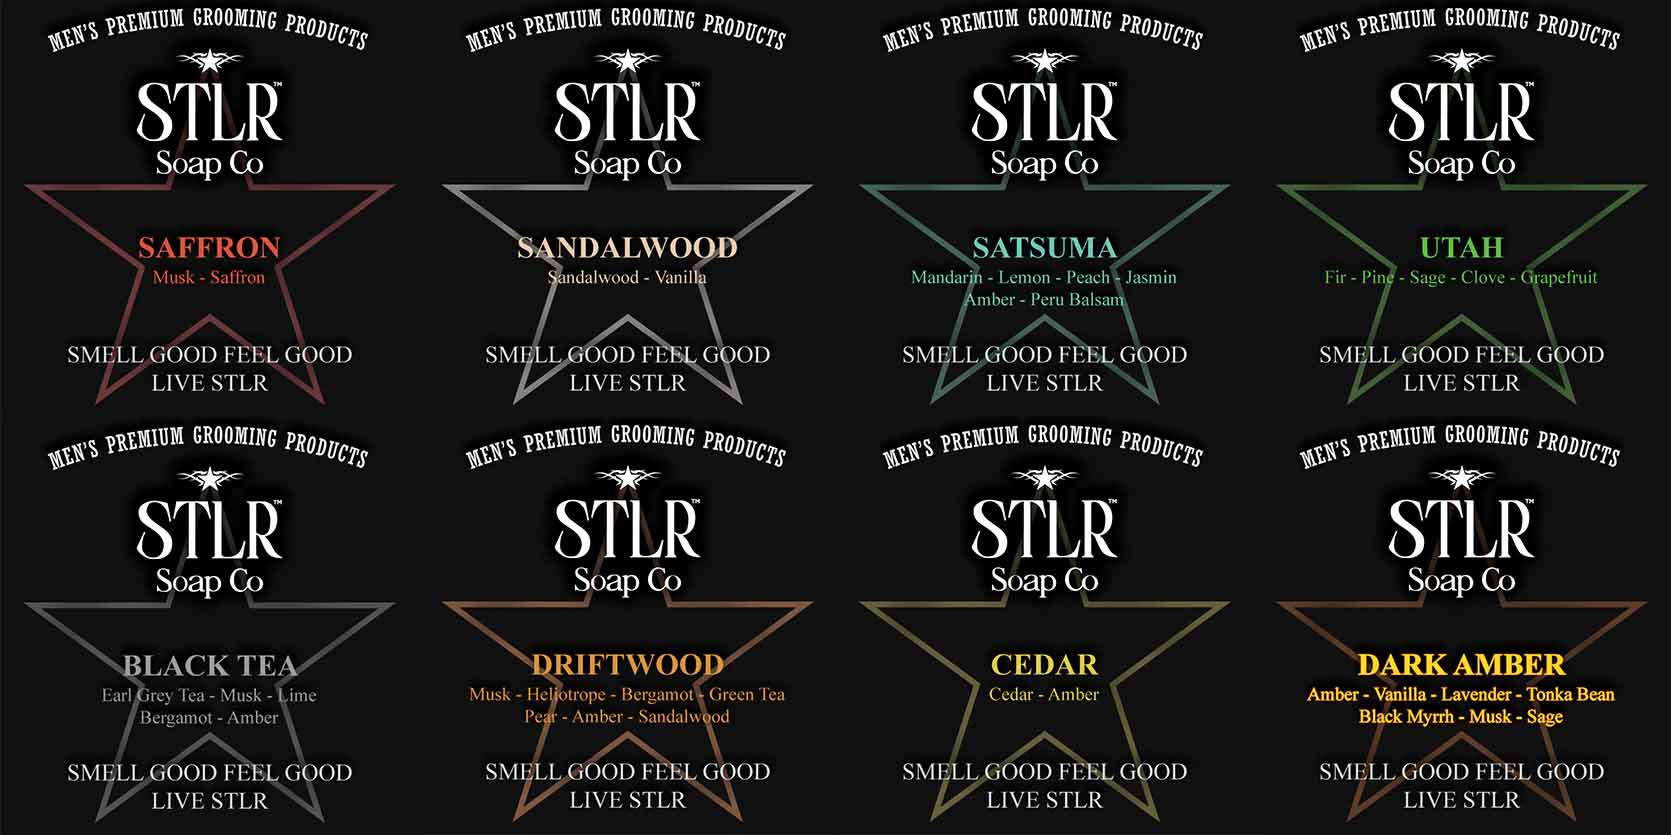 An image of STLR soap product labels distributed in a 6 x 2 grid